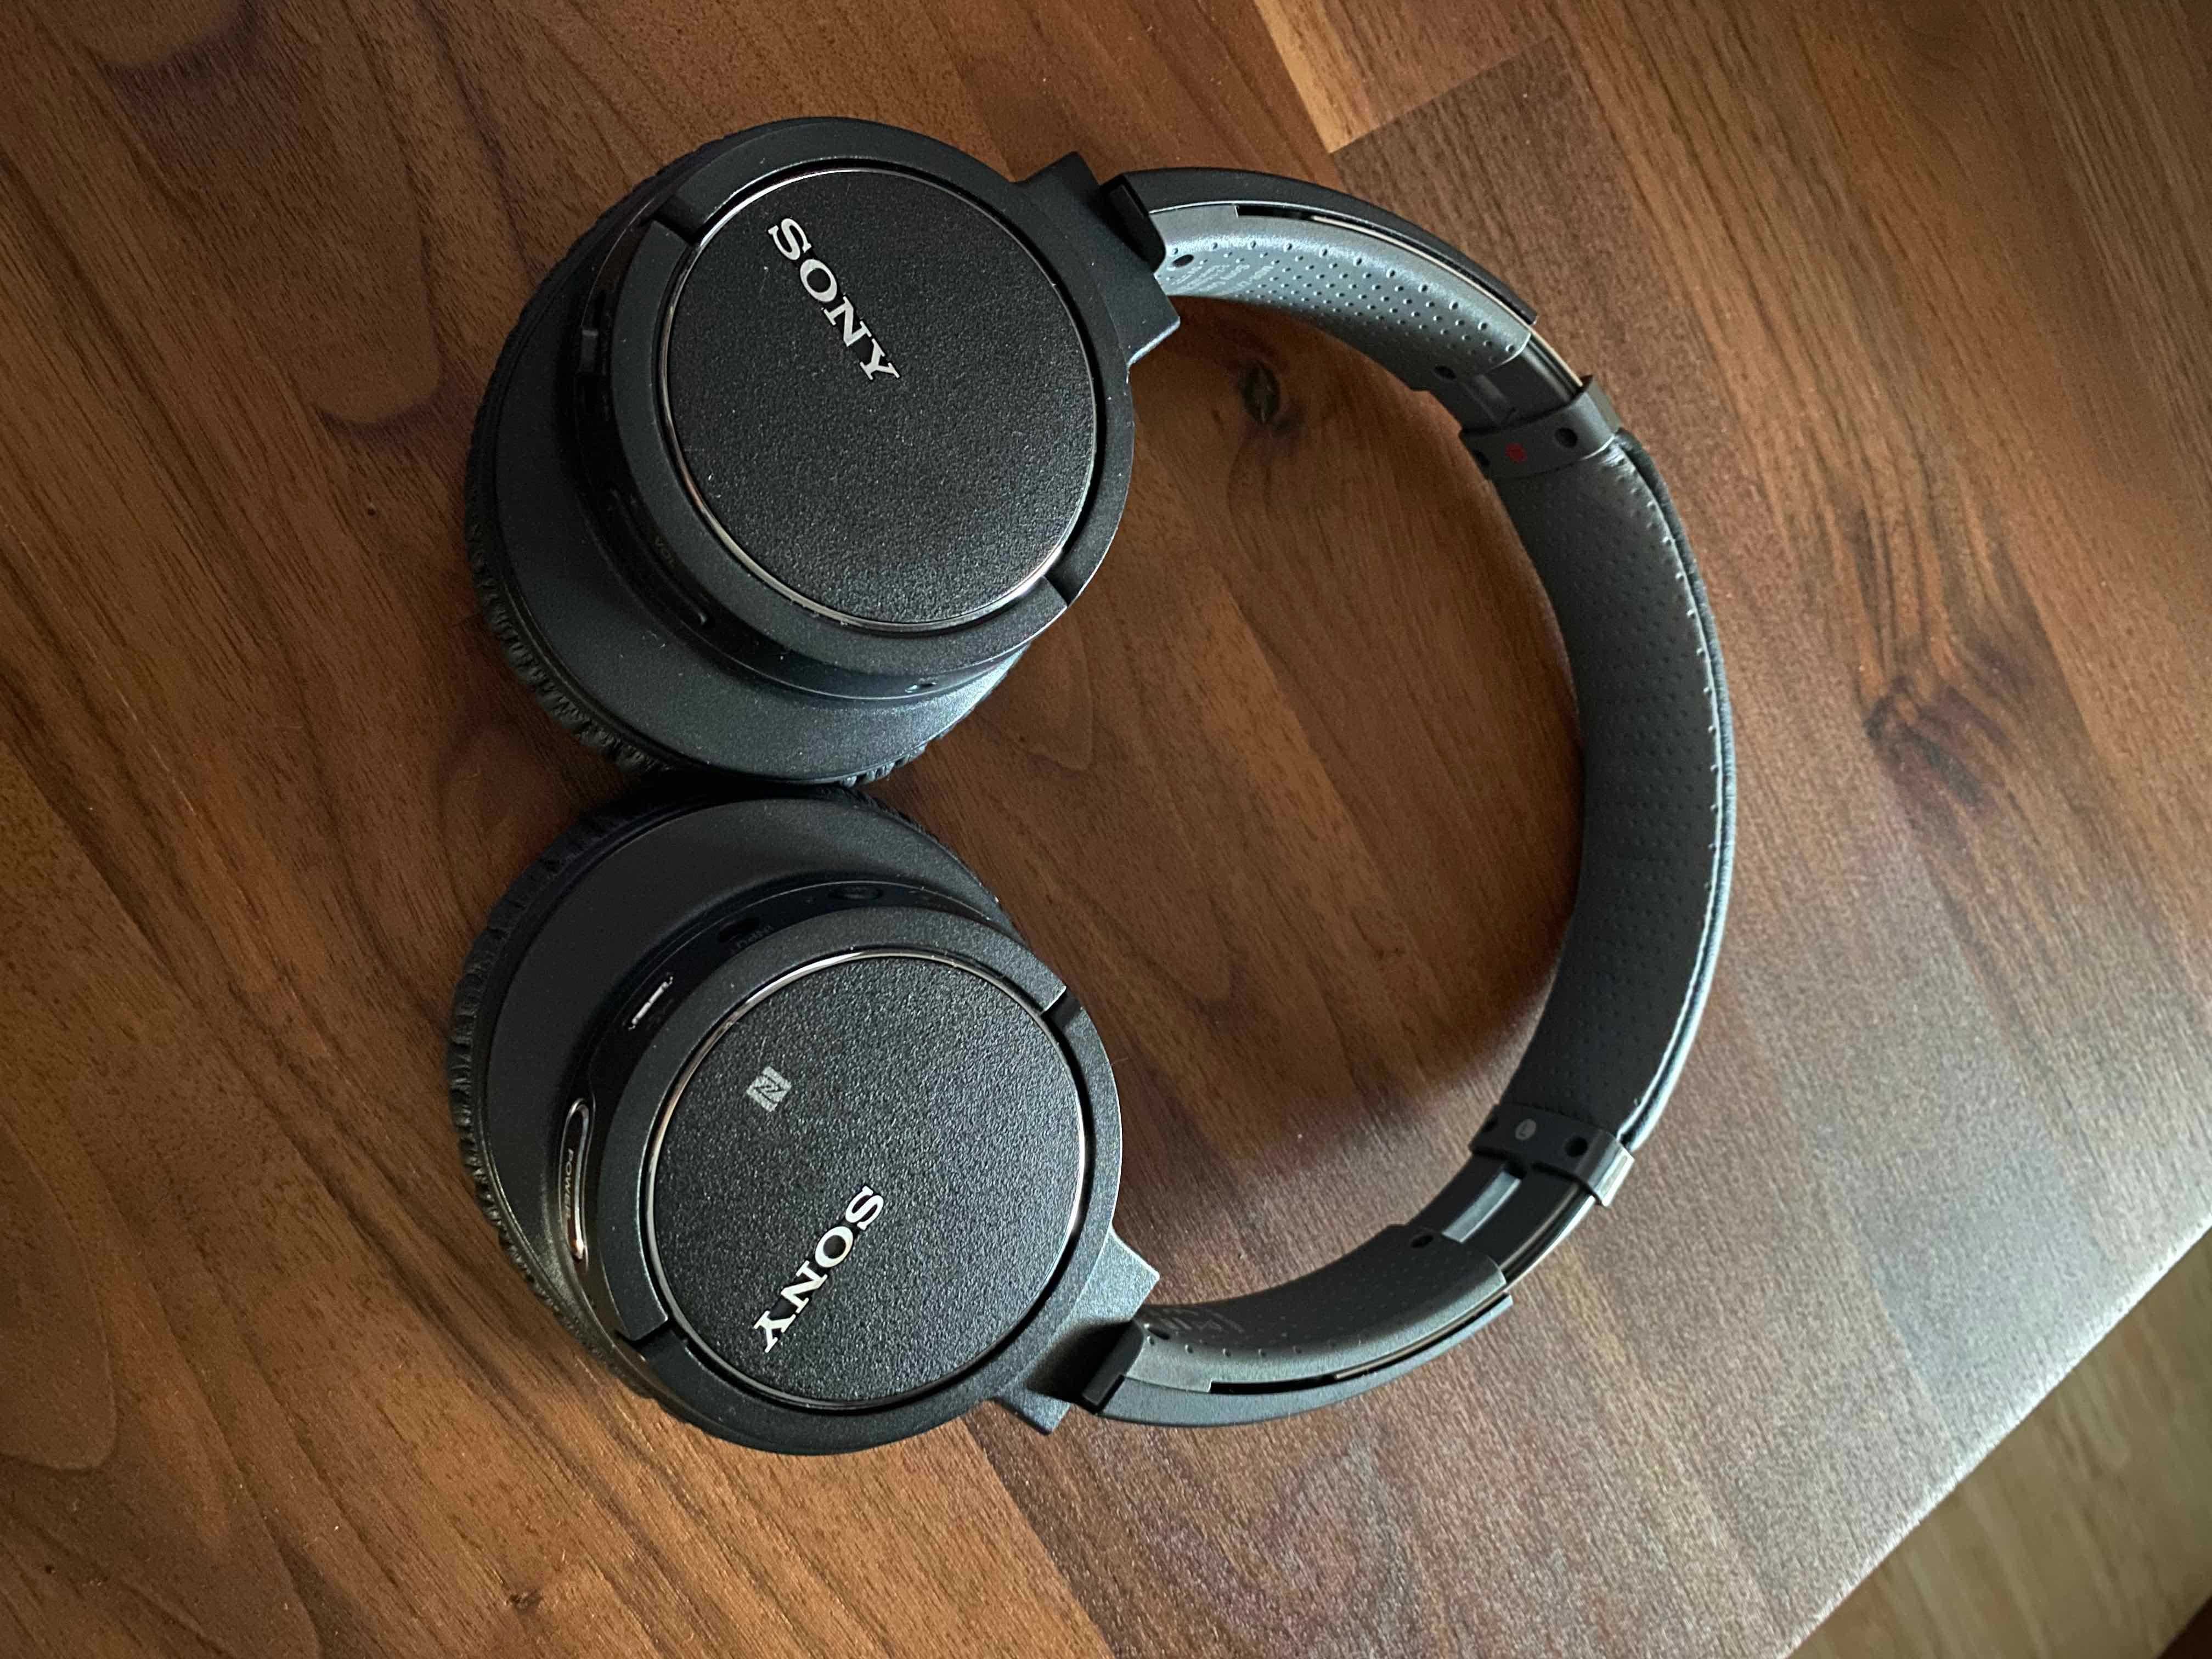 Sony MDR-ZX770BN Bluetooth Noise Canceling Headphones